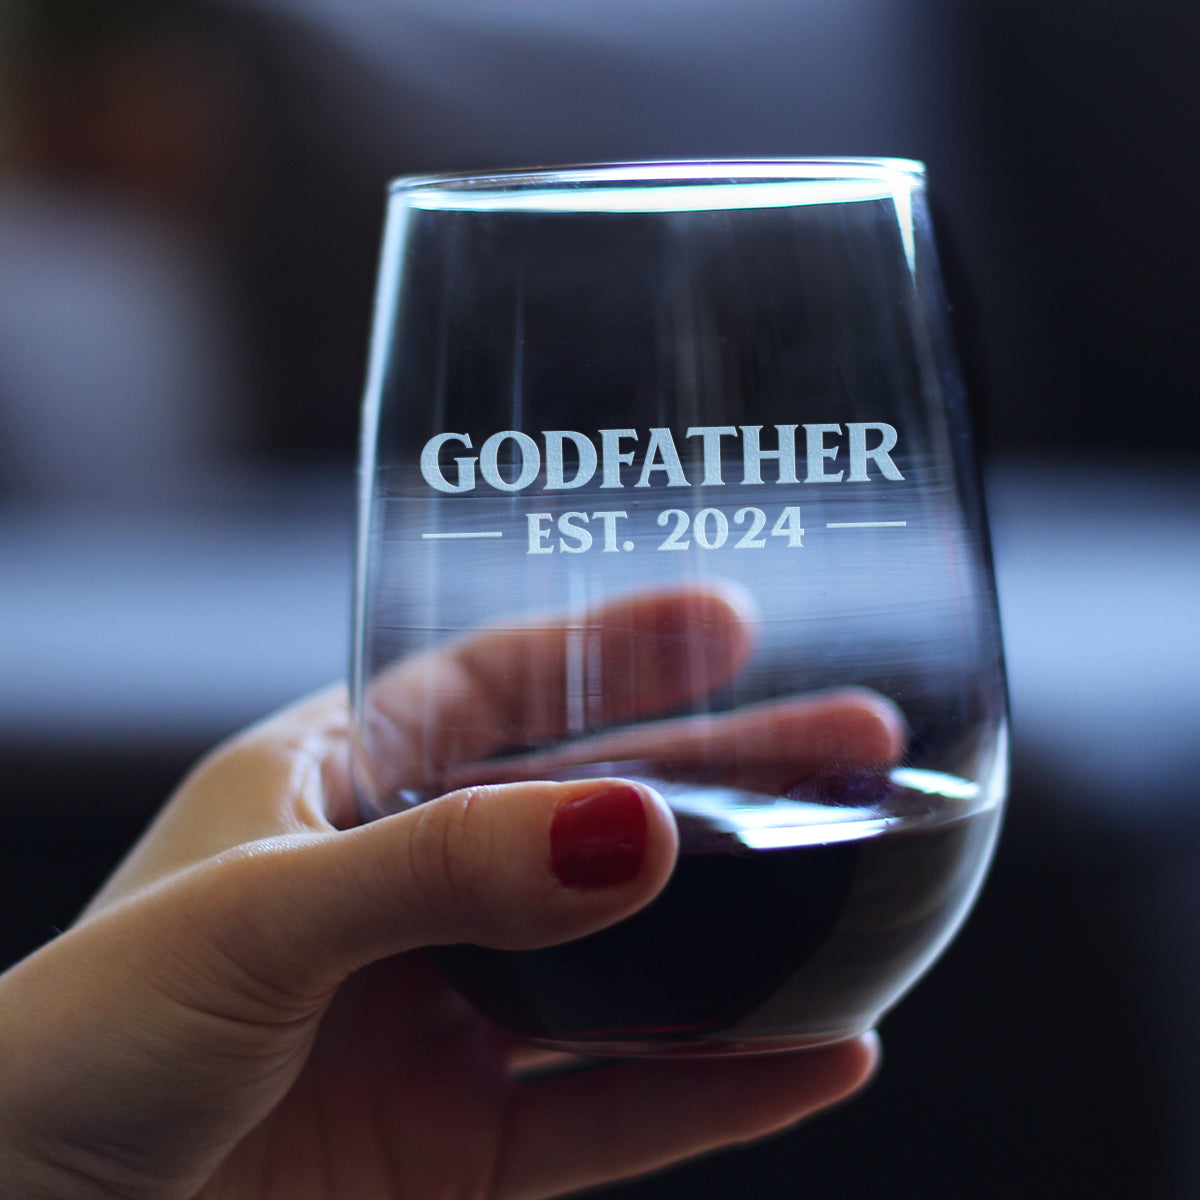 Godfather Est 2024 - New Godfather Stemless Wine Glass Proposal Gift for First Time Godparents - Bold 17 Oz Large Glasses